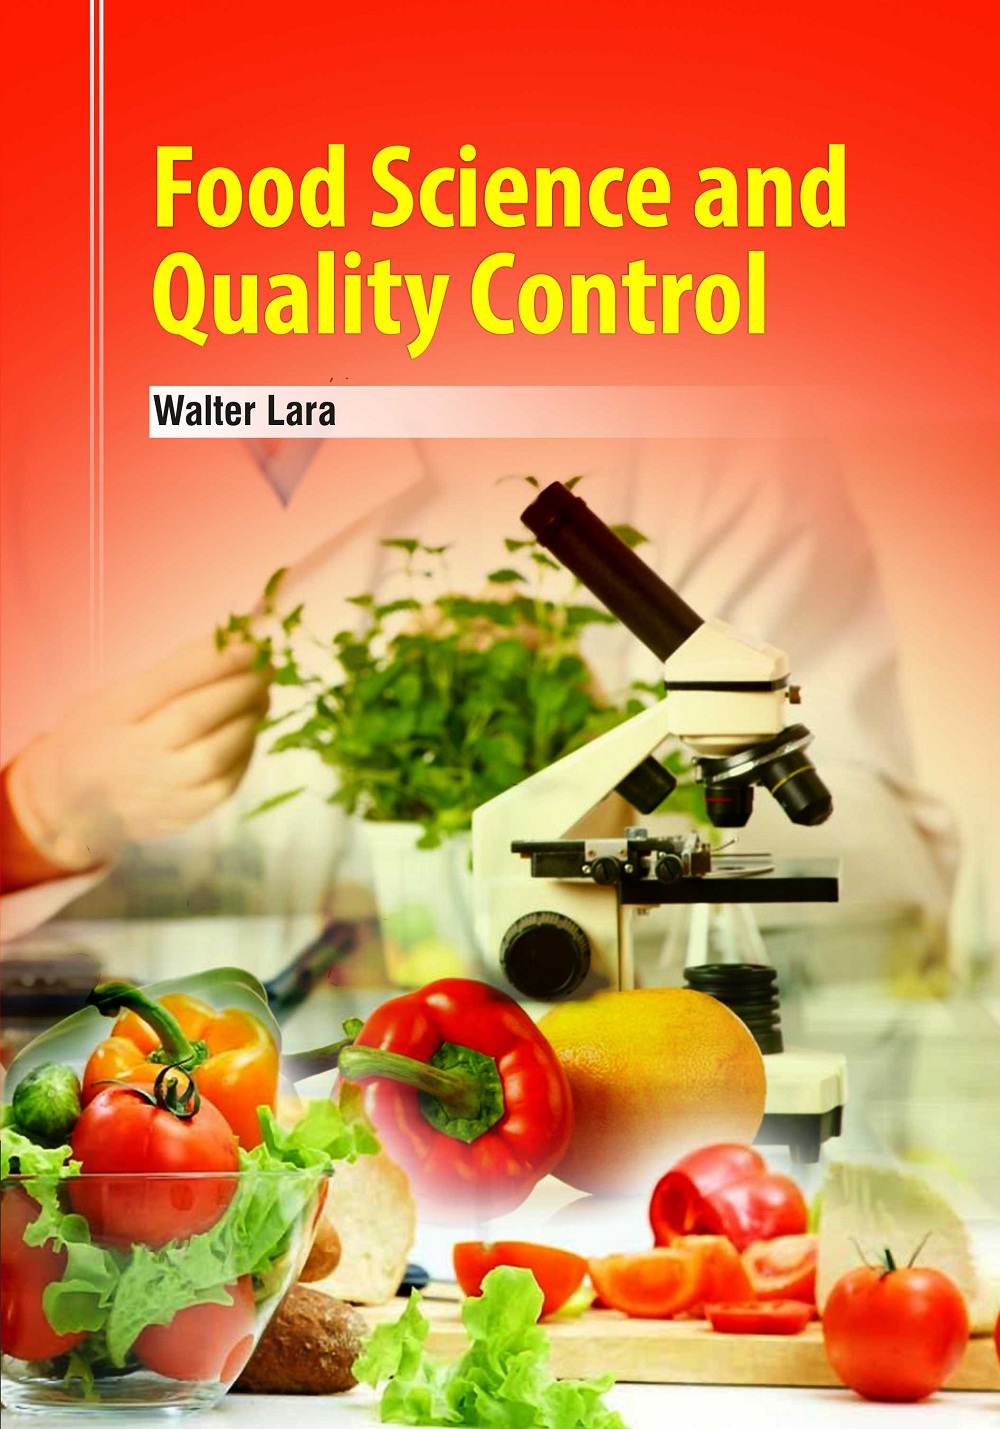 Food Science and Quality Control